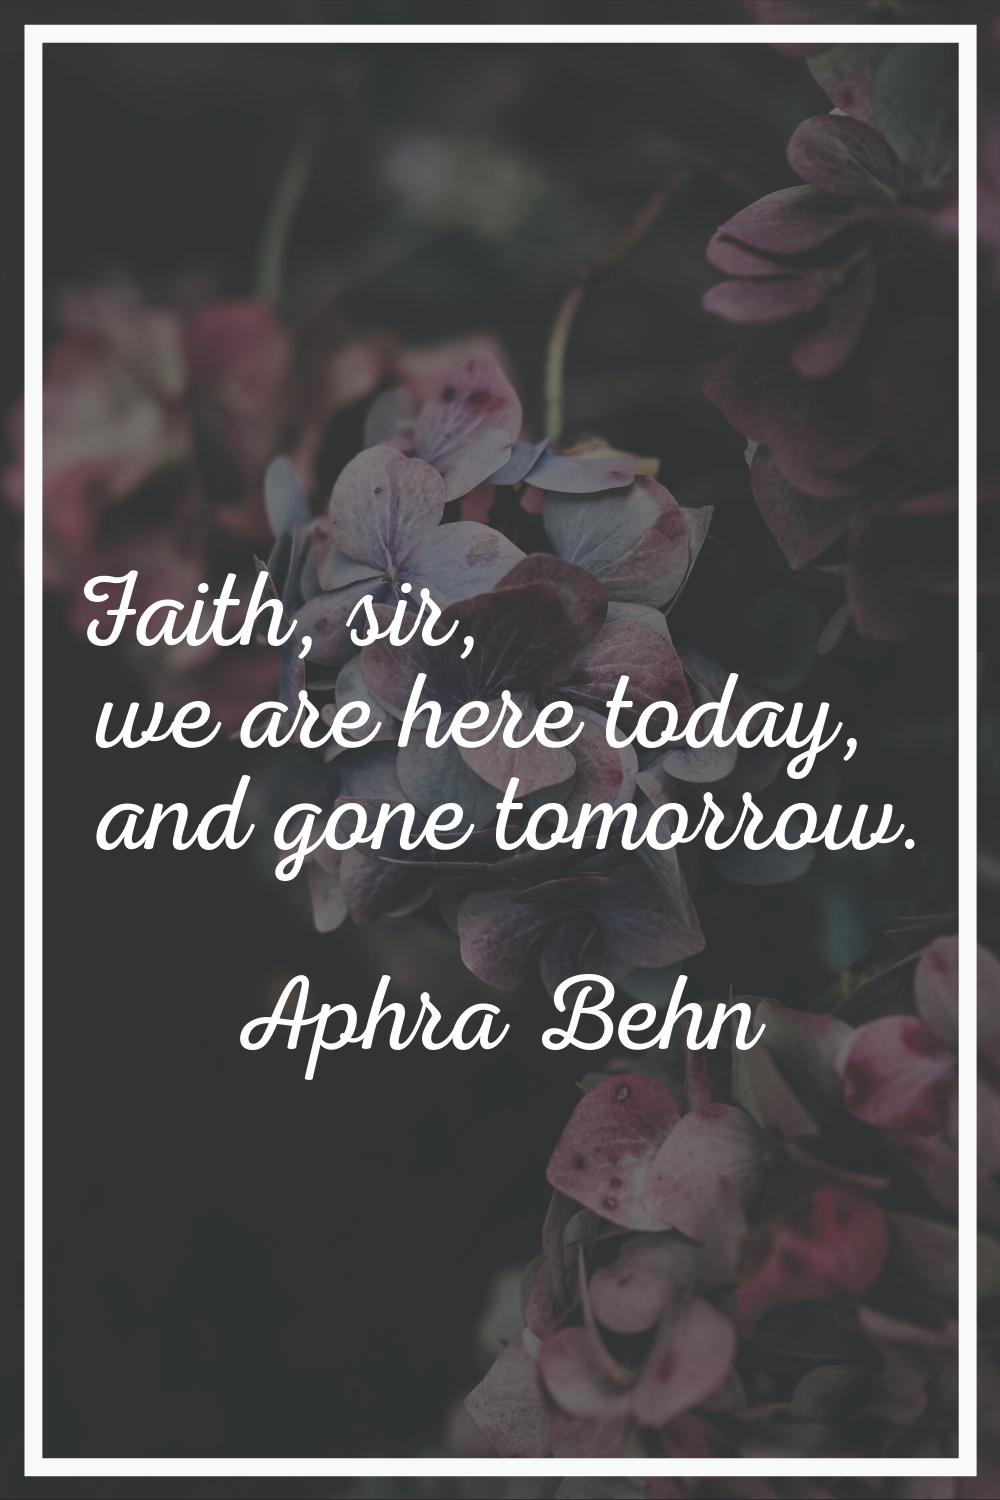 Faith, sir, we are here today, and gone tomorrow.